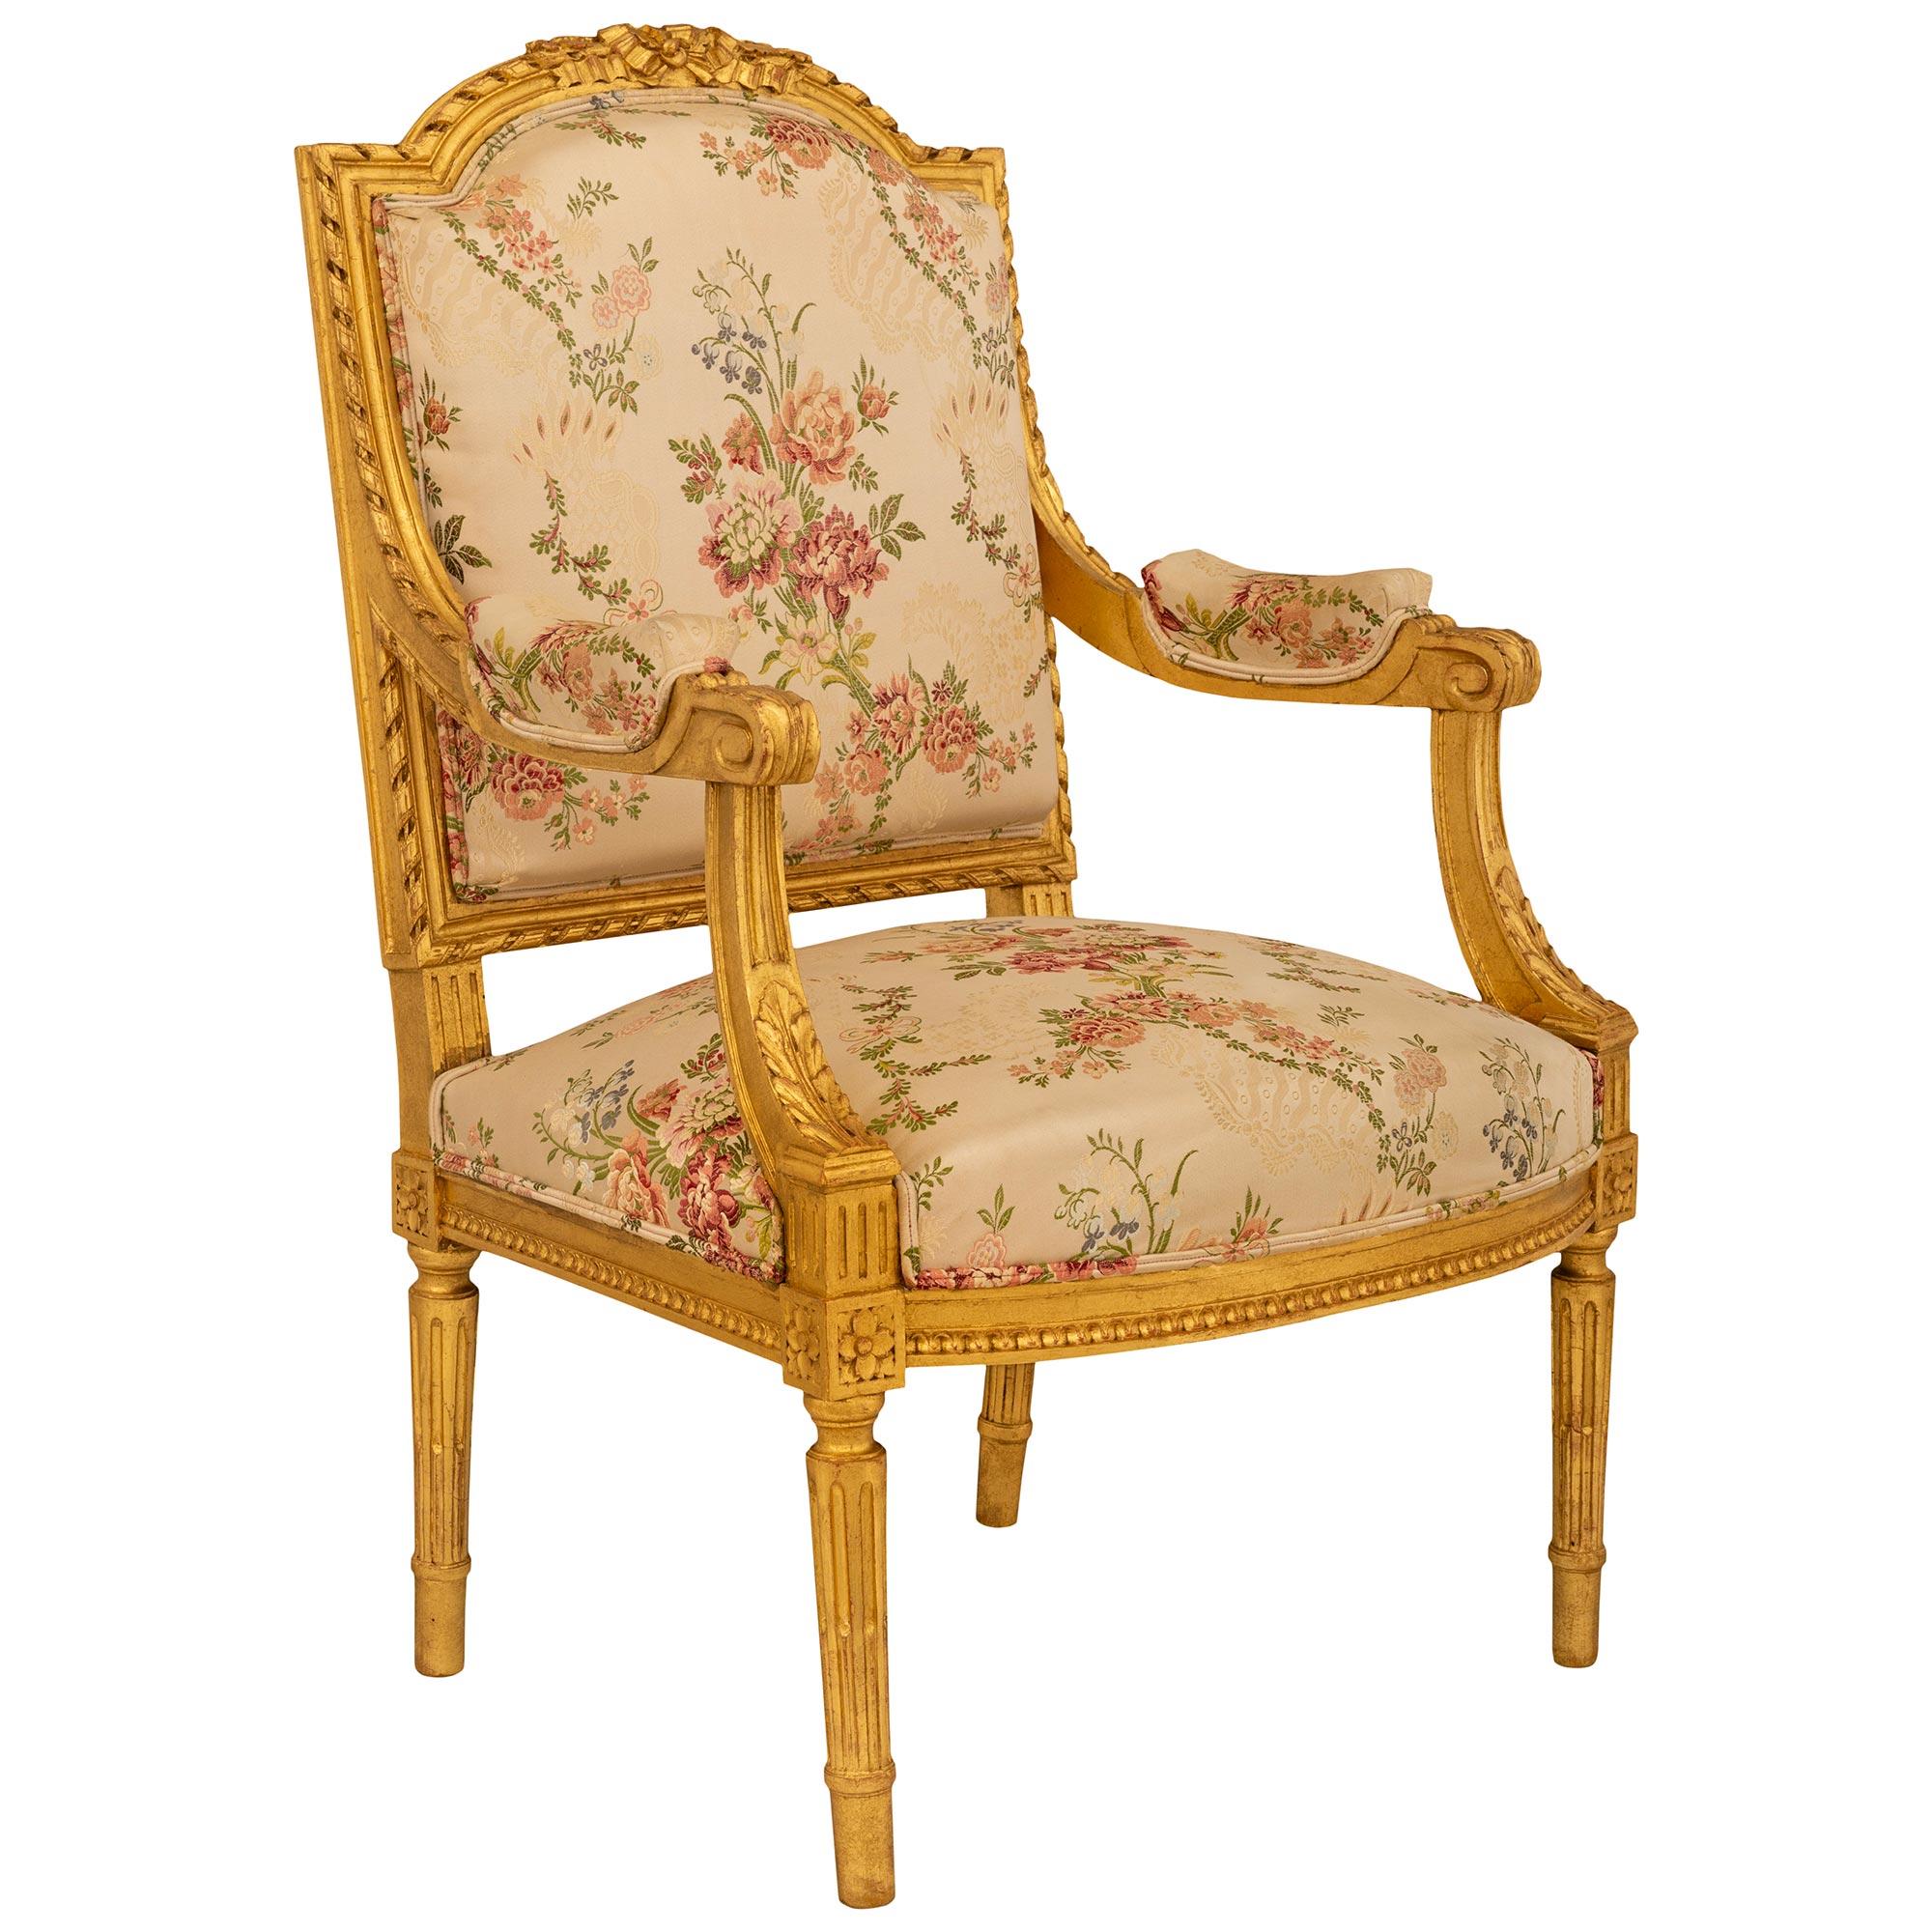 An elegant pair of French 19th century Louis XVI st. Giltwood armchairs. Each chair is supported by four round tapered and fluted Giltwood legs with richly carved rosette blocks atop each leg. The straight friezes on each side is decorated with